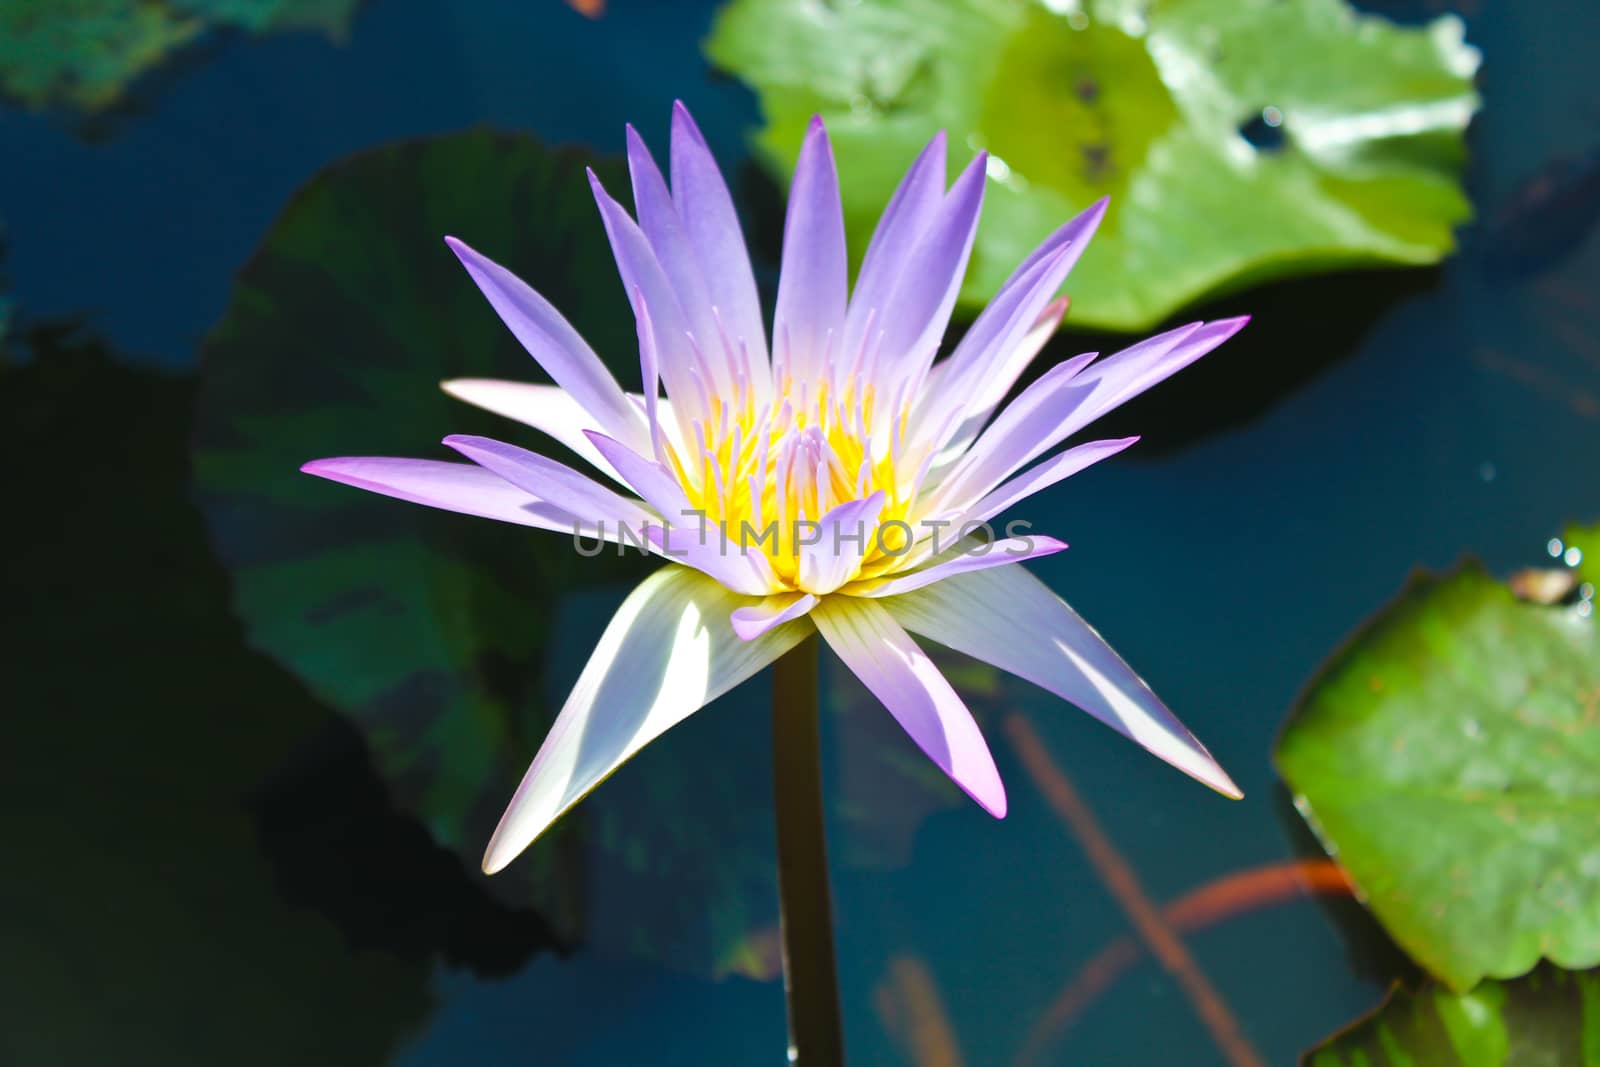 black-water pond with purple lotus which is blooming